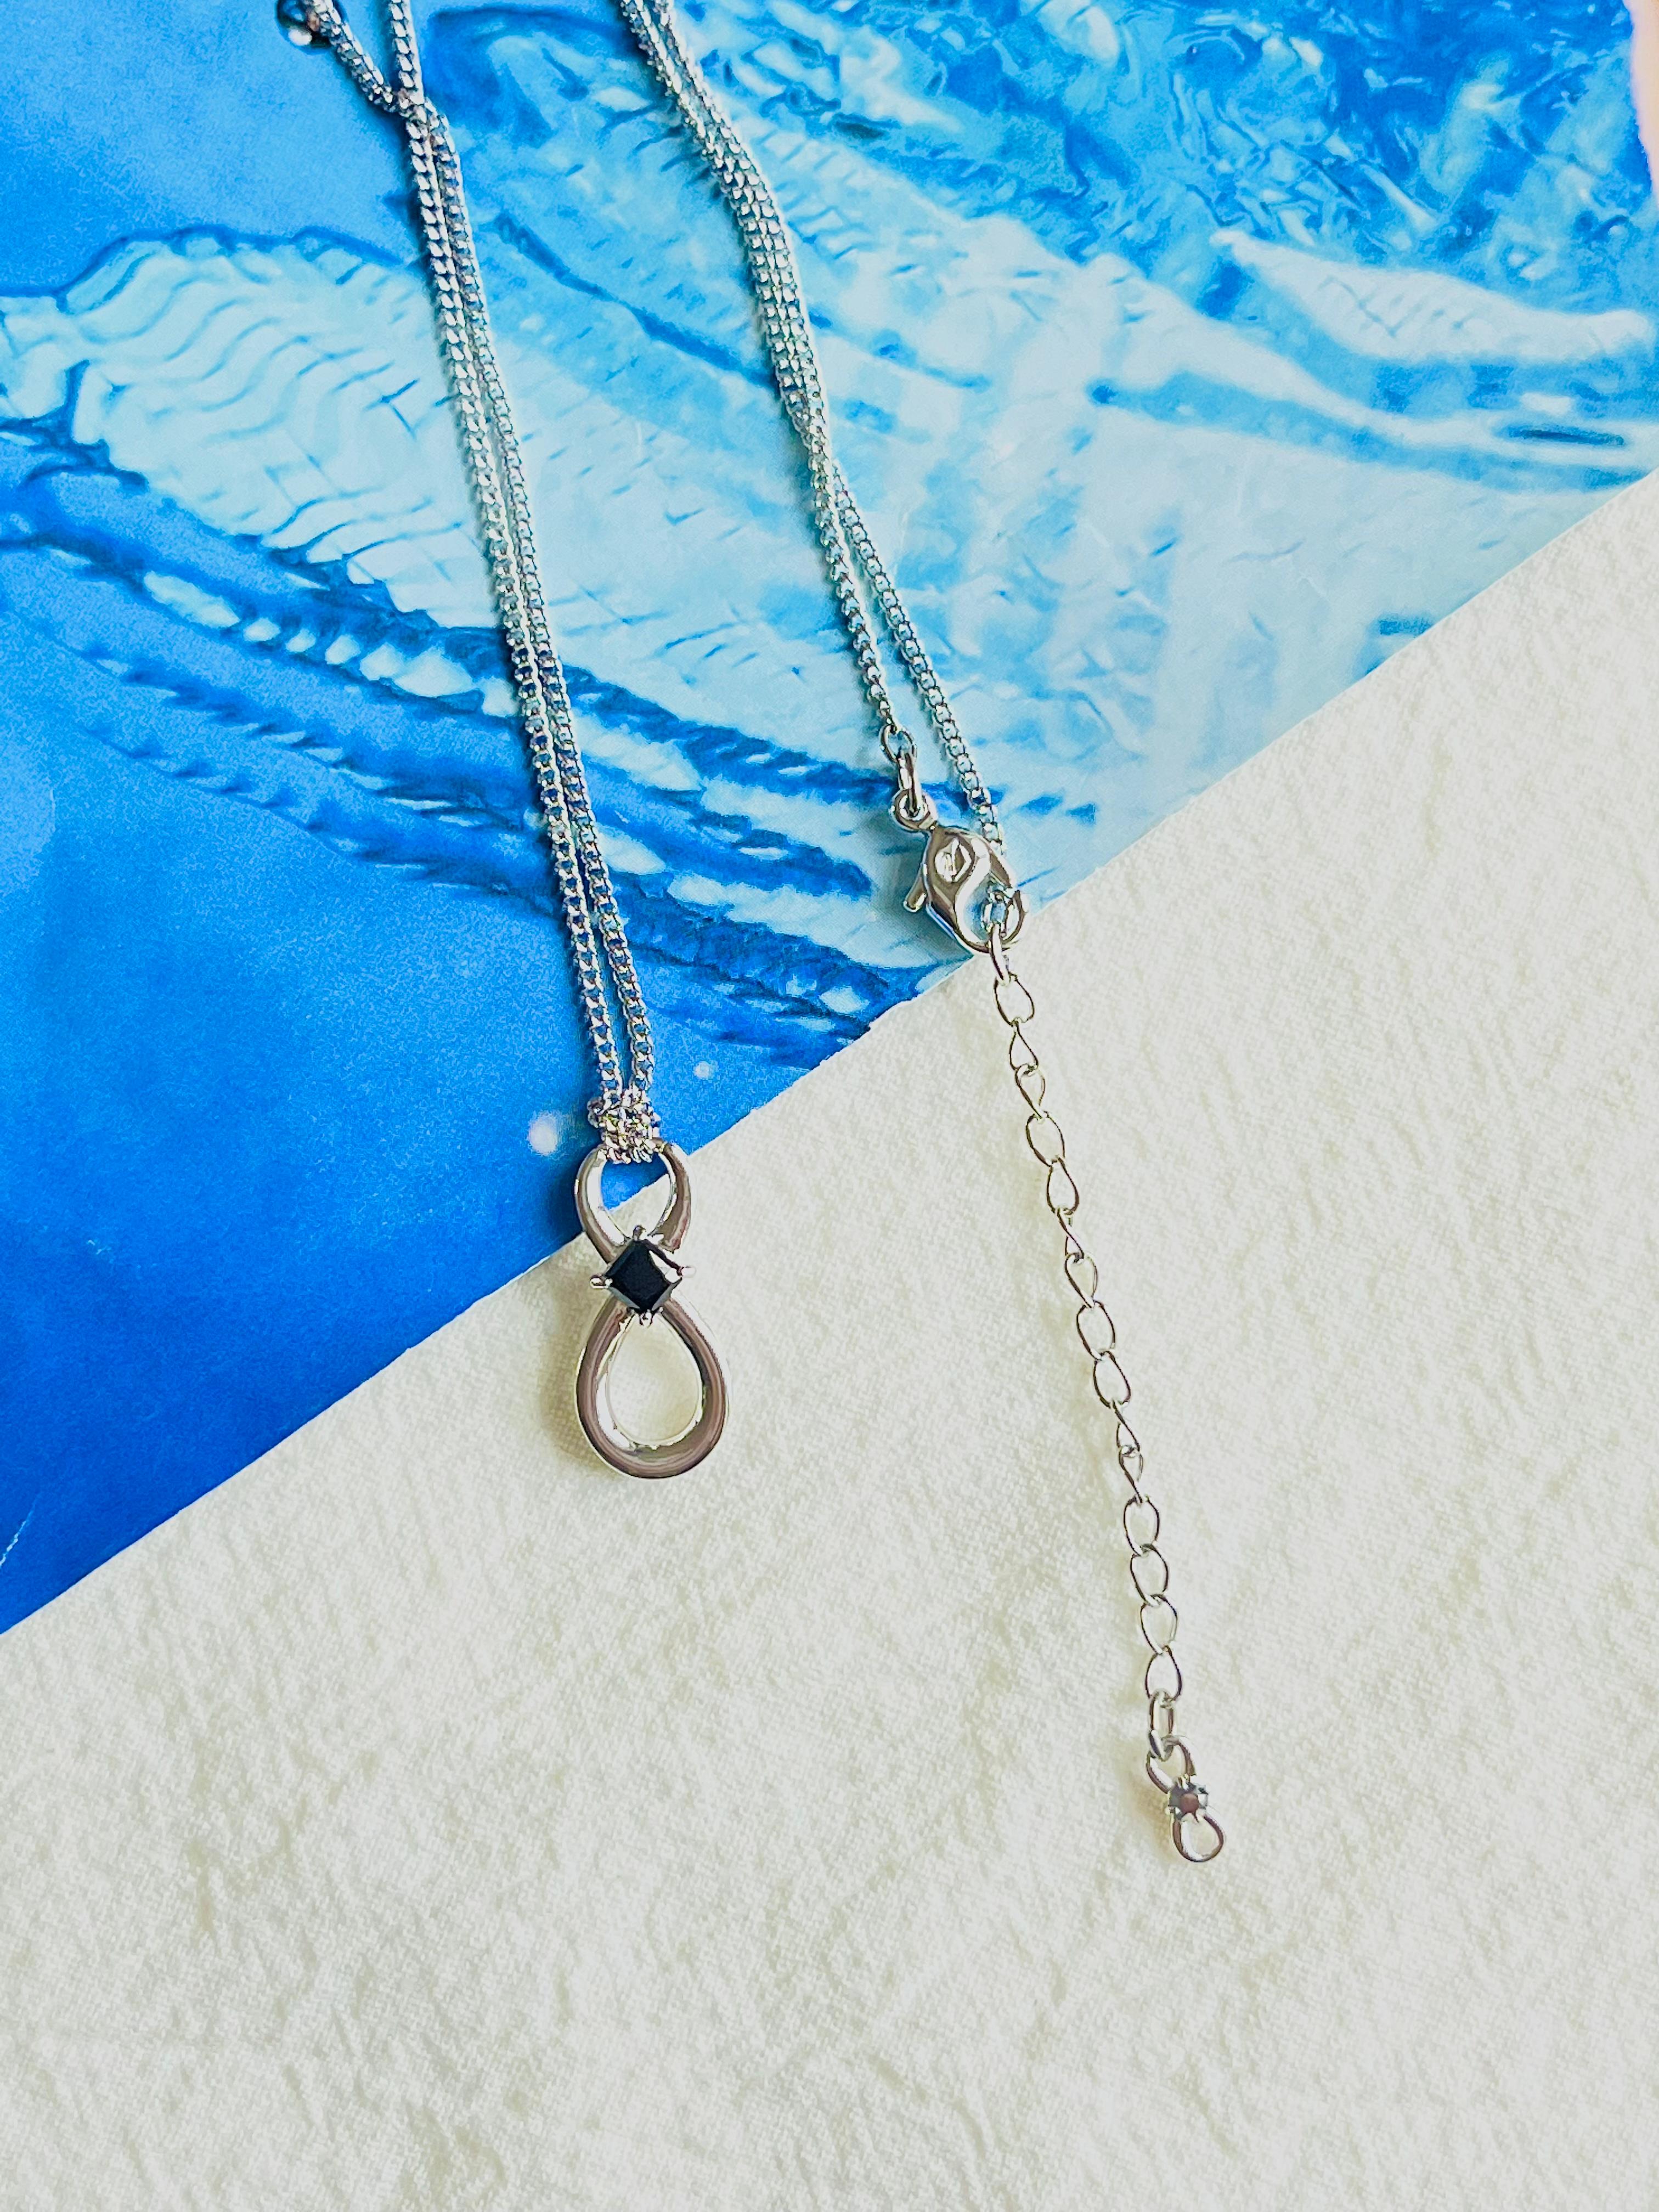 New with box. 100% Genuine.

This Swarovski pendant is truly timeless. It features the symbol of infinity with a single, dark stone set at the symbol's junction that contrasts attractively with its rhodium plating. The design's simple elegance makes